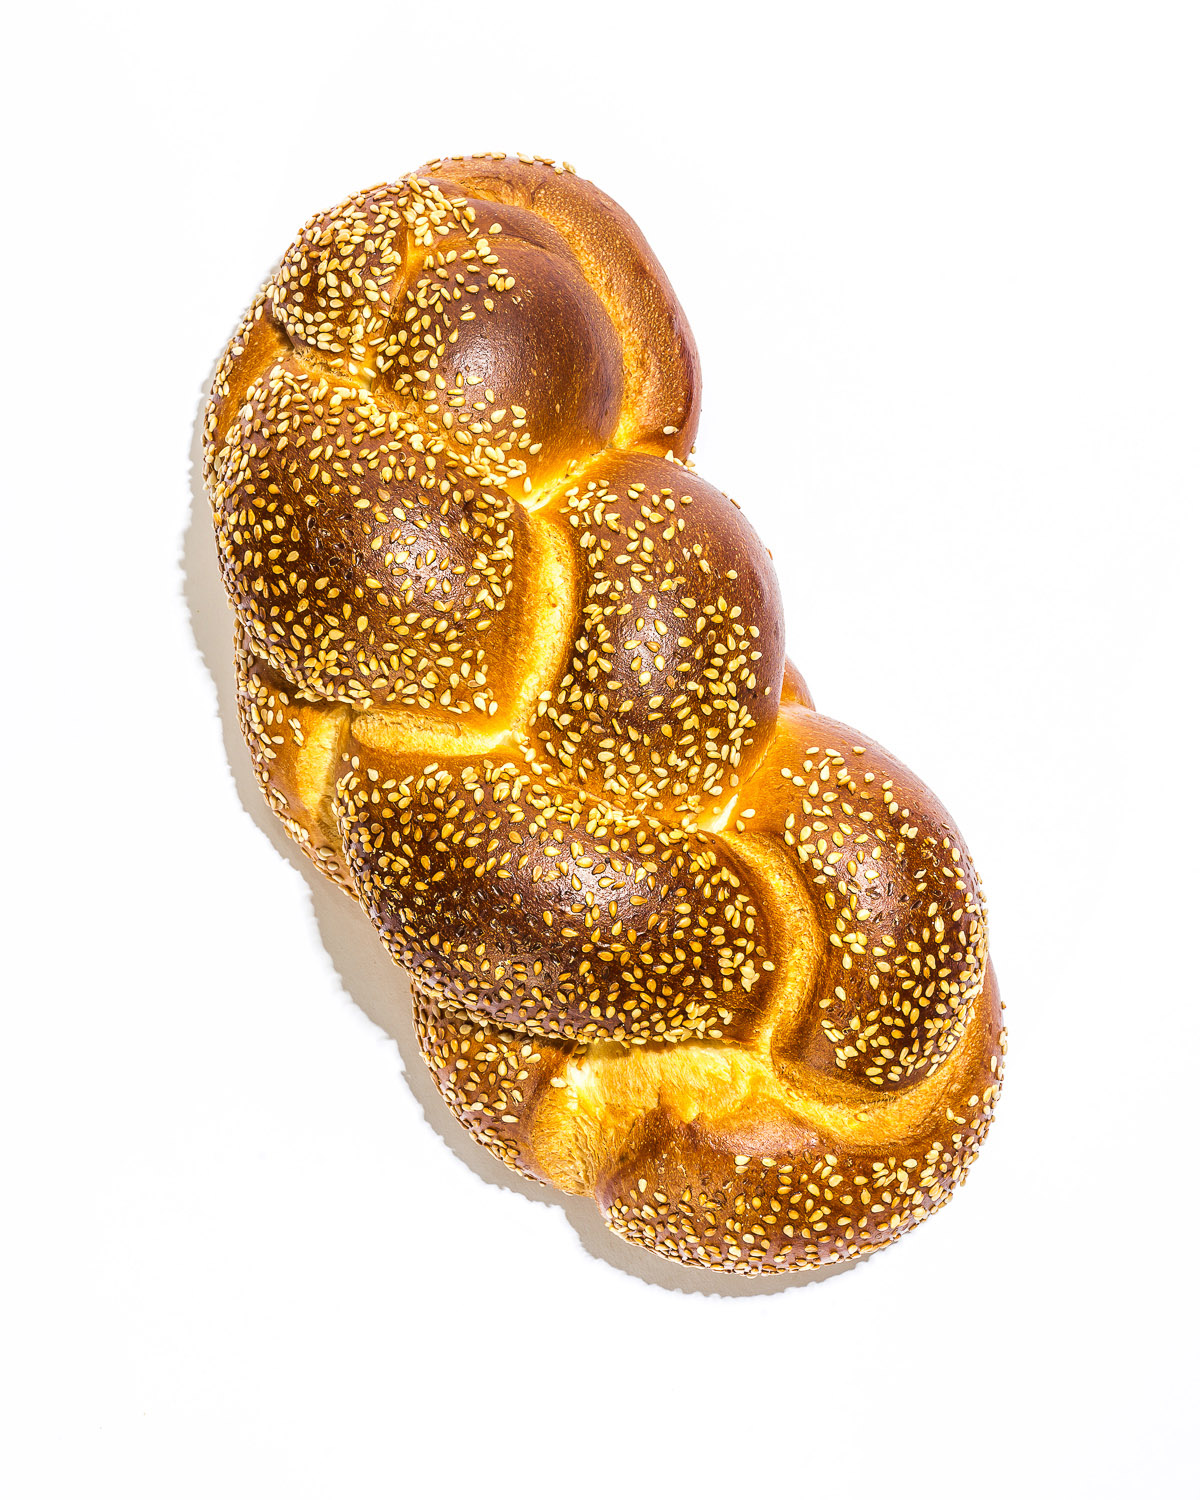 Challah and Other Sabbath Breads